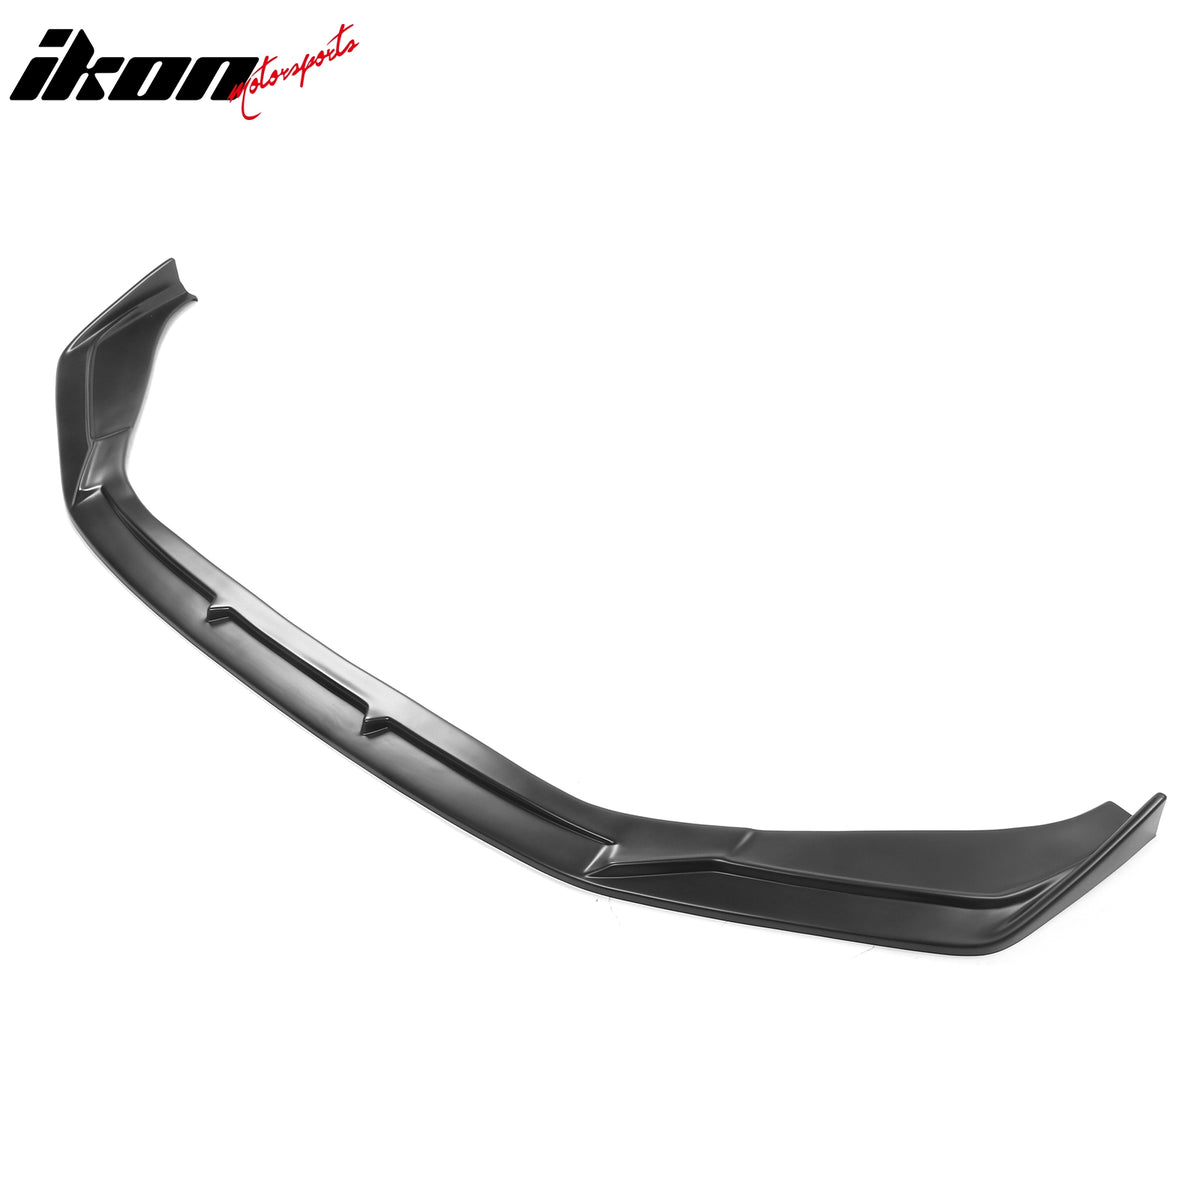 IKON MOTORSPORTS Front Bumper Lip, Compatible with 2021-2024 Lexus IS350 IS300 F Sport, IKON V2 Style ABS Plastic Air Dam Chin Spoiler Protector Splitter 1PC